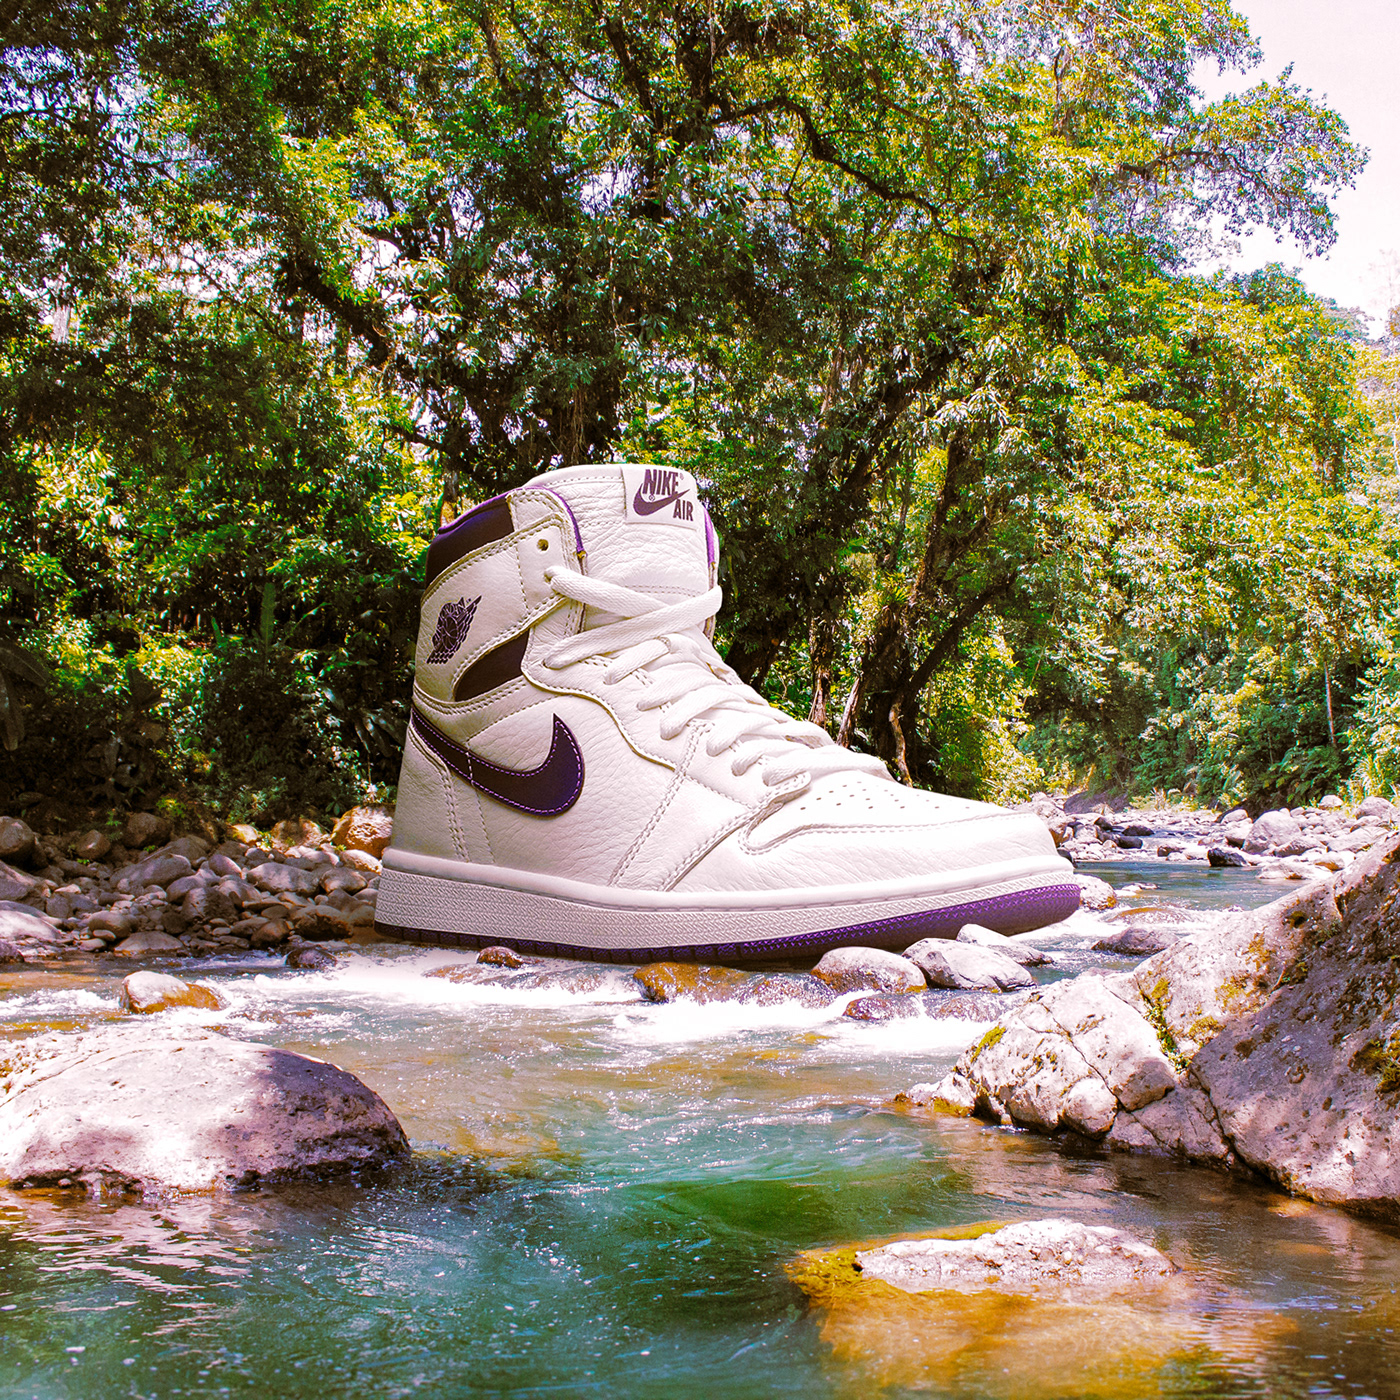 Photo composite of giant sneaker in nature. Retouching using Photoshop
